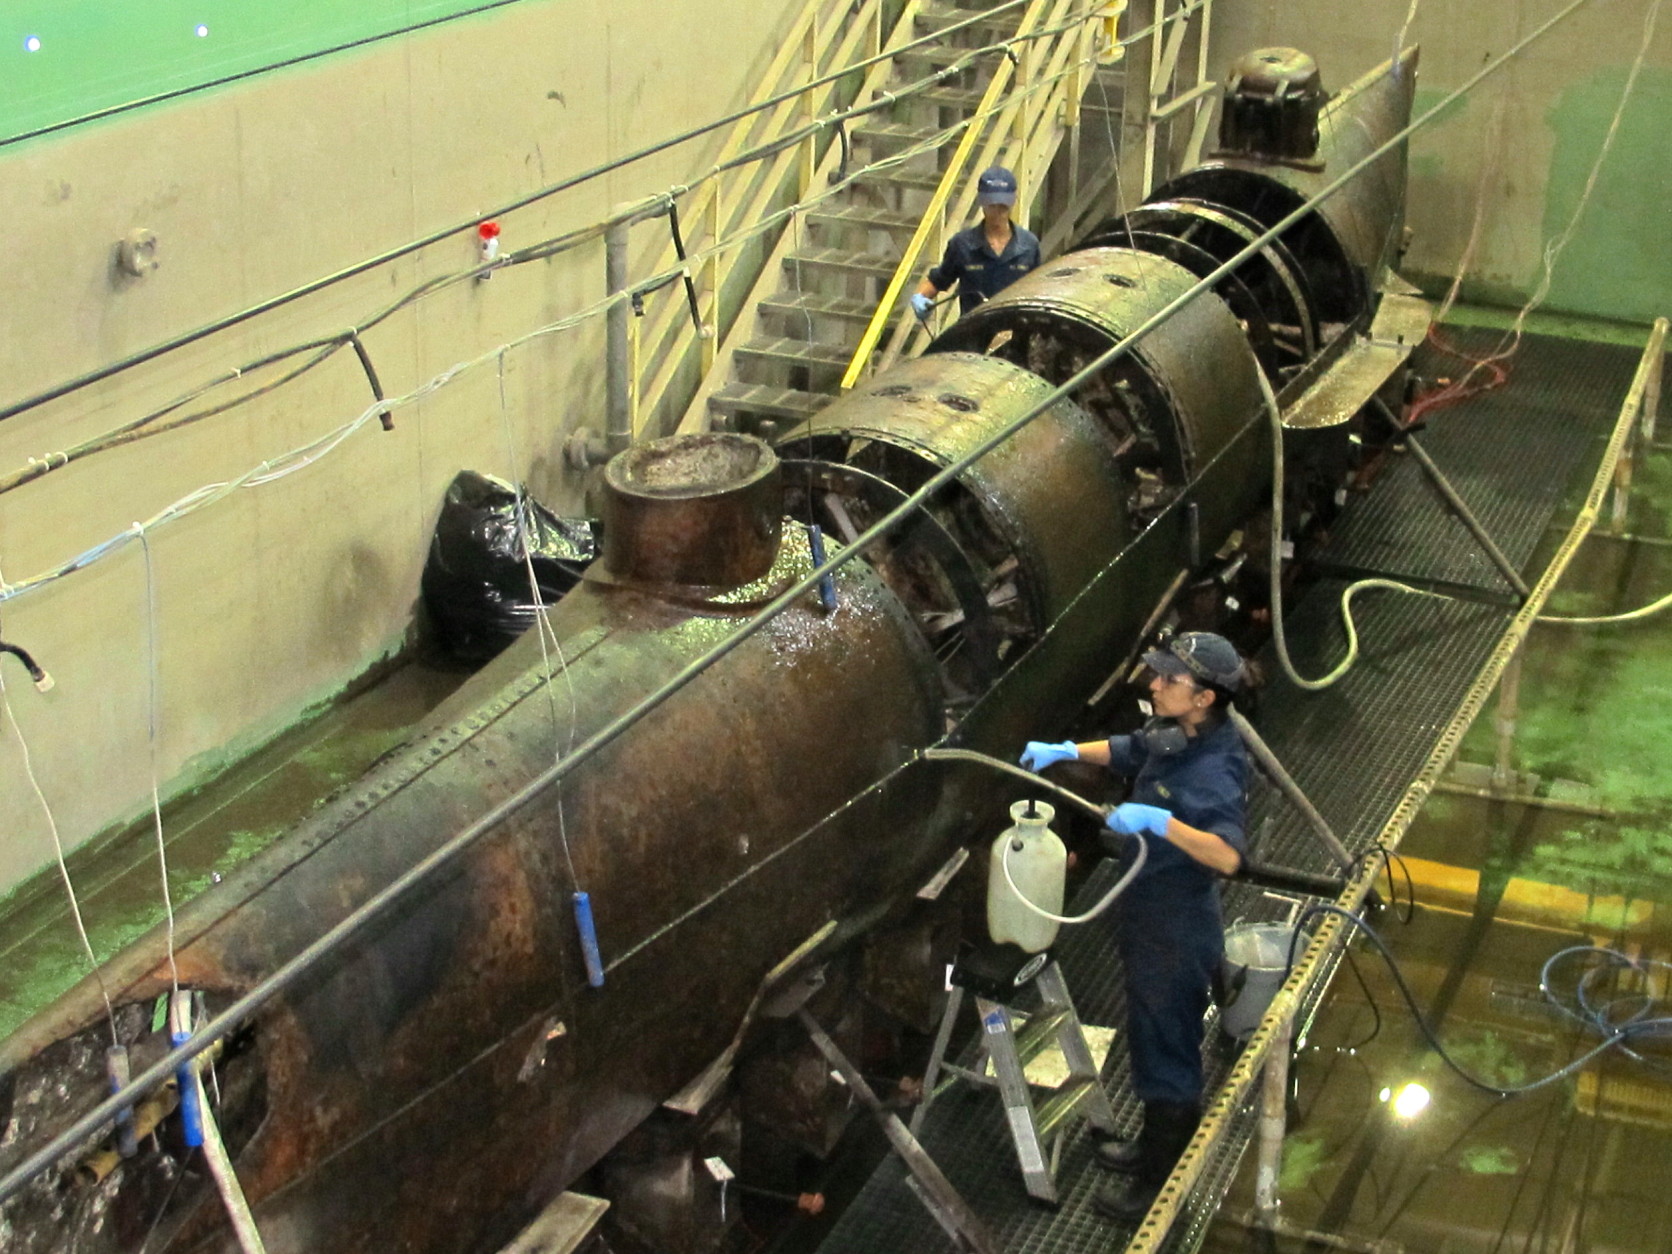 The Confederate submarine H.L. Hunley, the first submarine in history to sink an enemy warship, sits in a conservation tank at a lab in North Charleston, S.C. on Thursday, Sept. 17, 2015. Scientists have just completed a year of painstaking work to remove the encrusted sediment and rust from the outer hull of the submarine. But they say cleaning the hull provided no smoking gun as to why the hand-cranked submarine sank in February of 1864 after sinking a Union blockade ship off Charleston, S.C. (AP Photo/Bruce Smith)